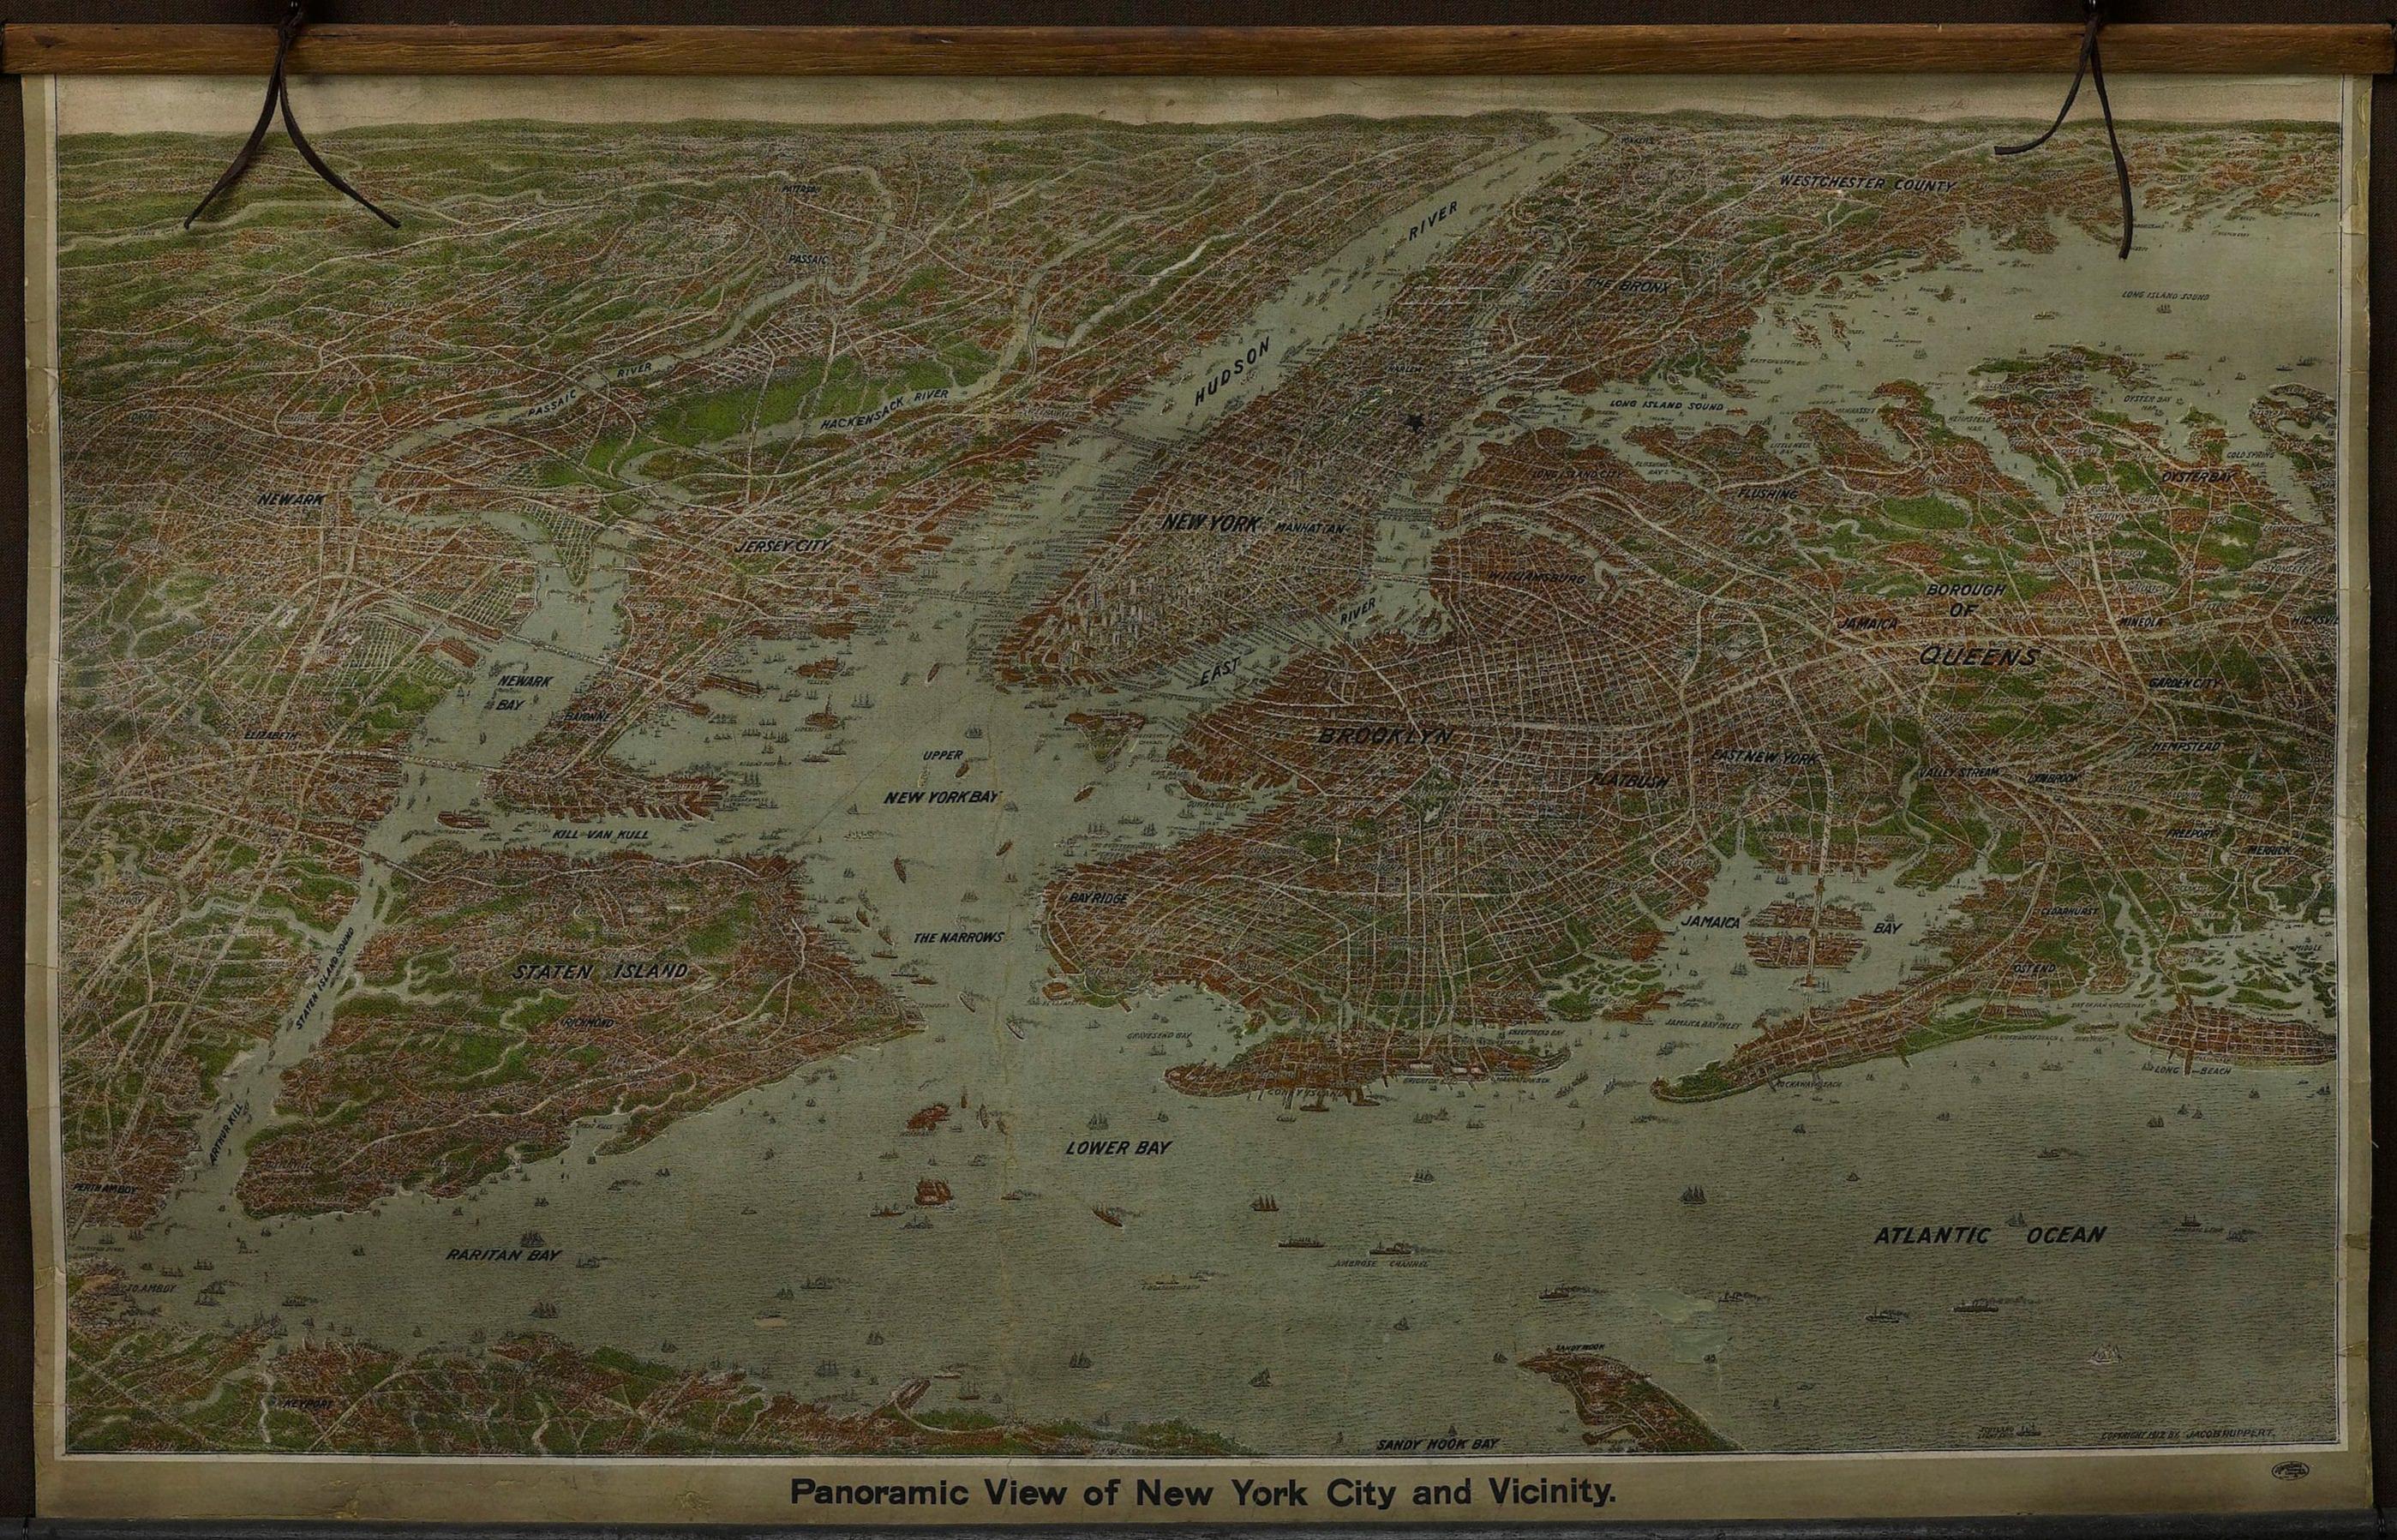 This is an attractive and very scarce map of New York, published by the Yorkville brewer Jacob Ruppert in 1912. The map shows an expansive view of the region reaching from Sandy Hook in the south and Yonkers to the north, to Hicksville in the east